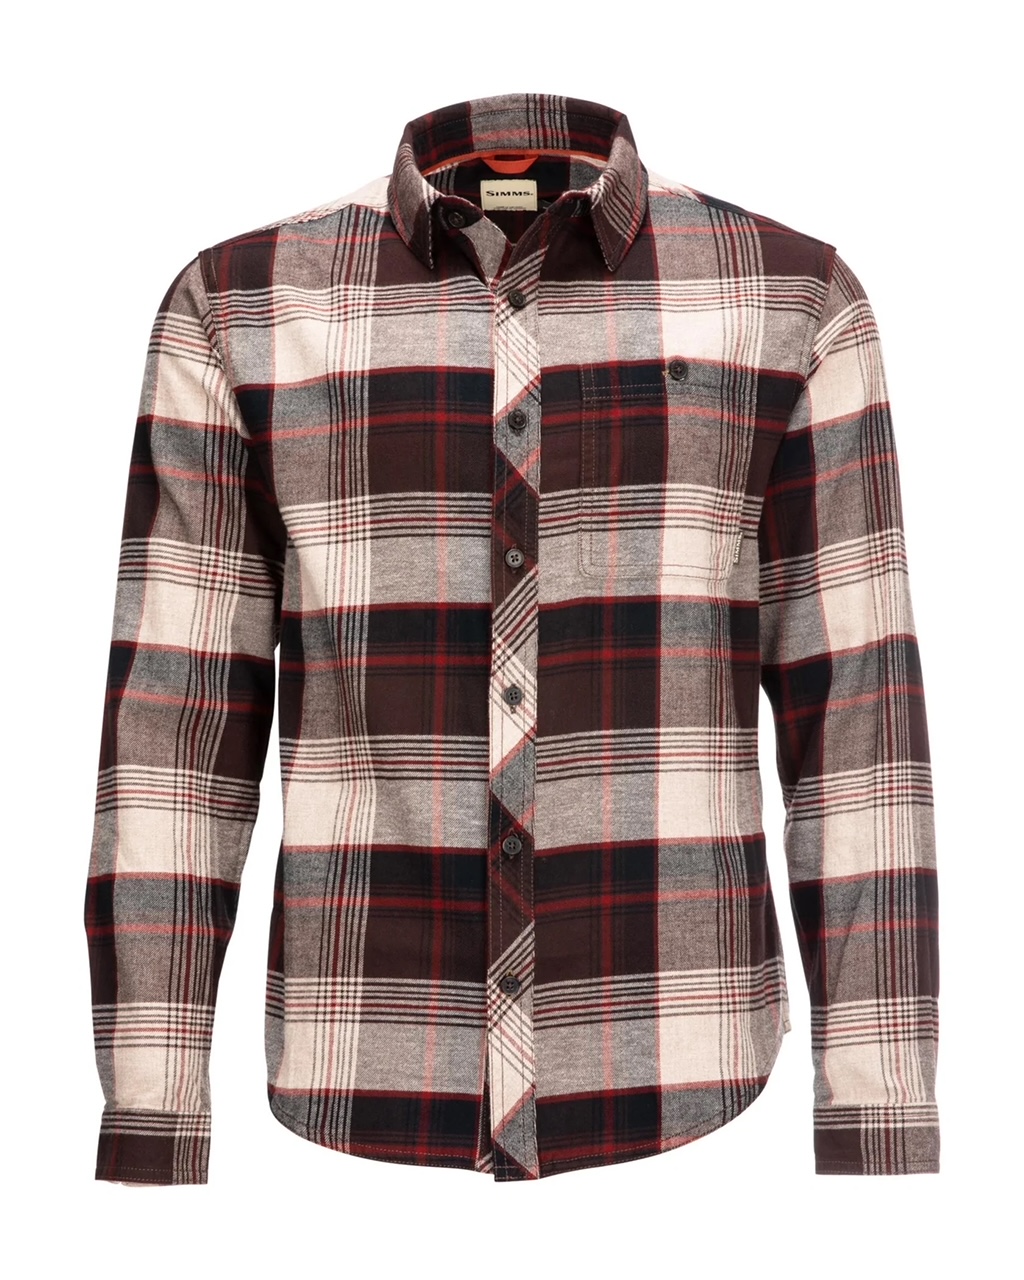 Simms M's Dockwear Cotton Flannel - Mahogany Red Plaid - Small